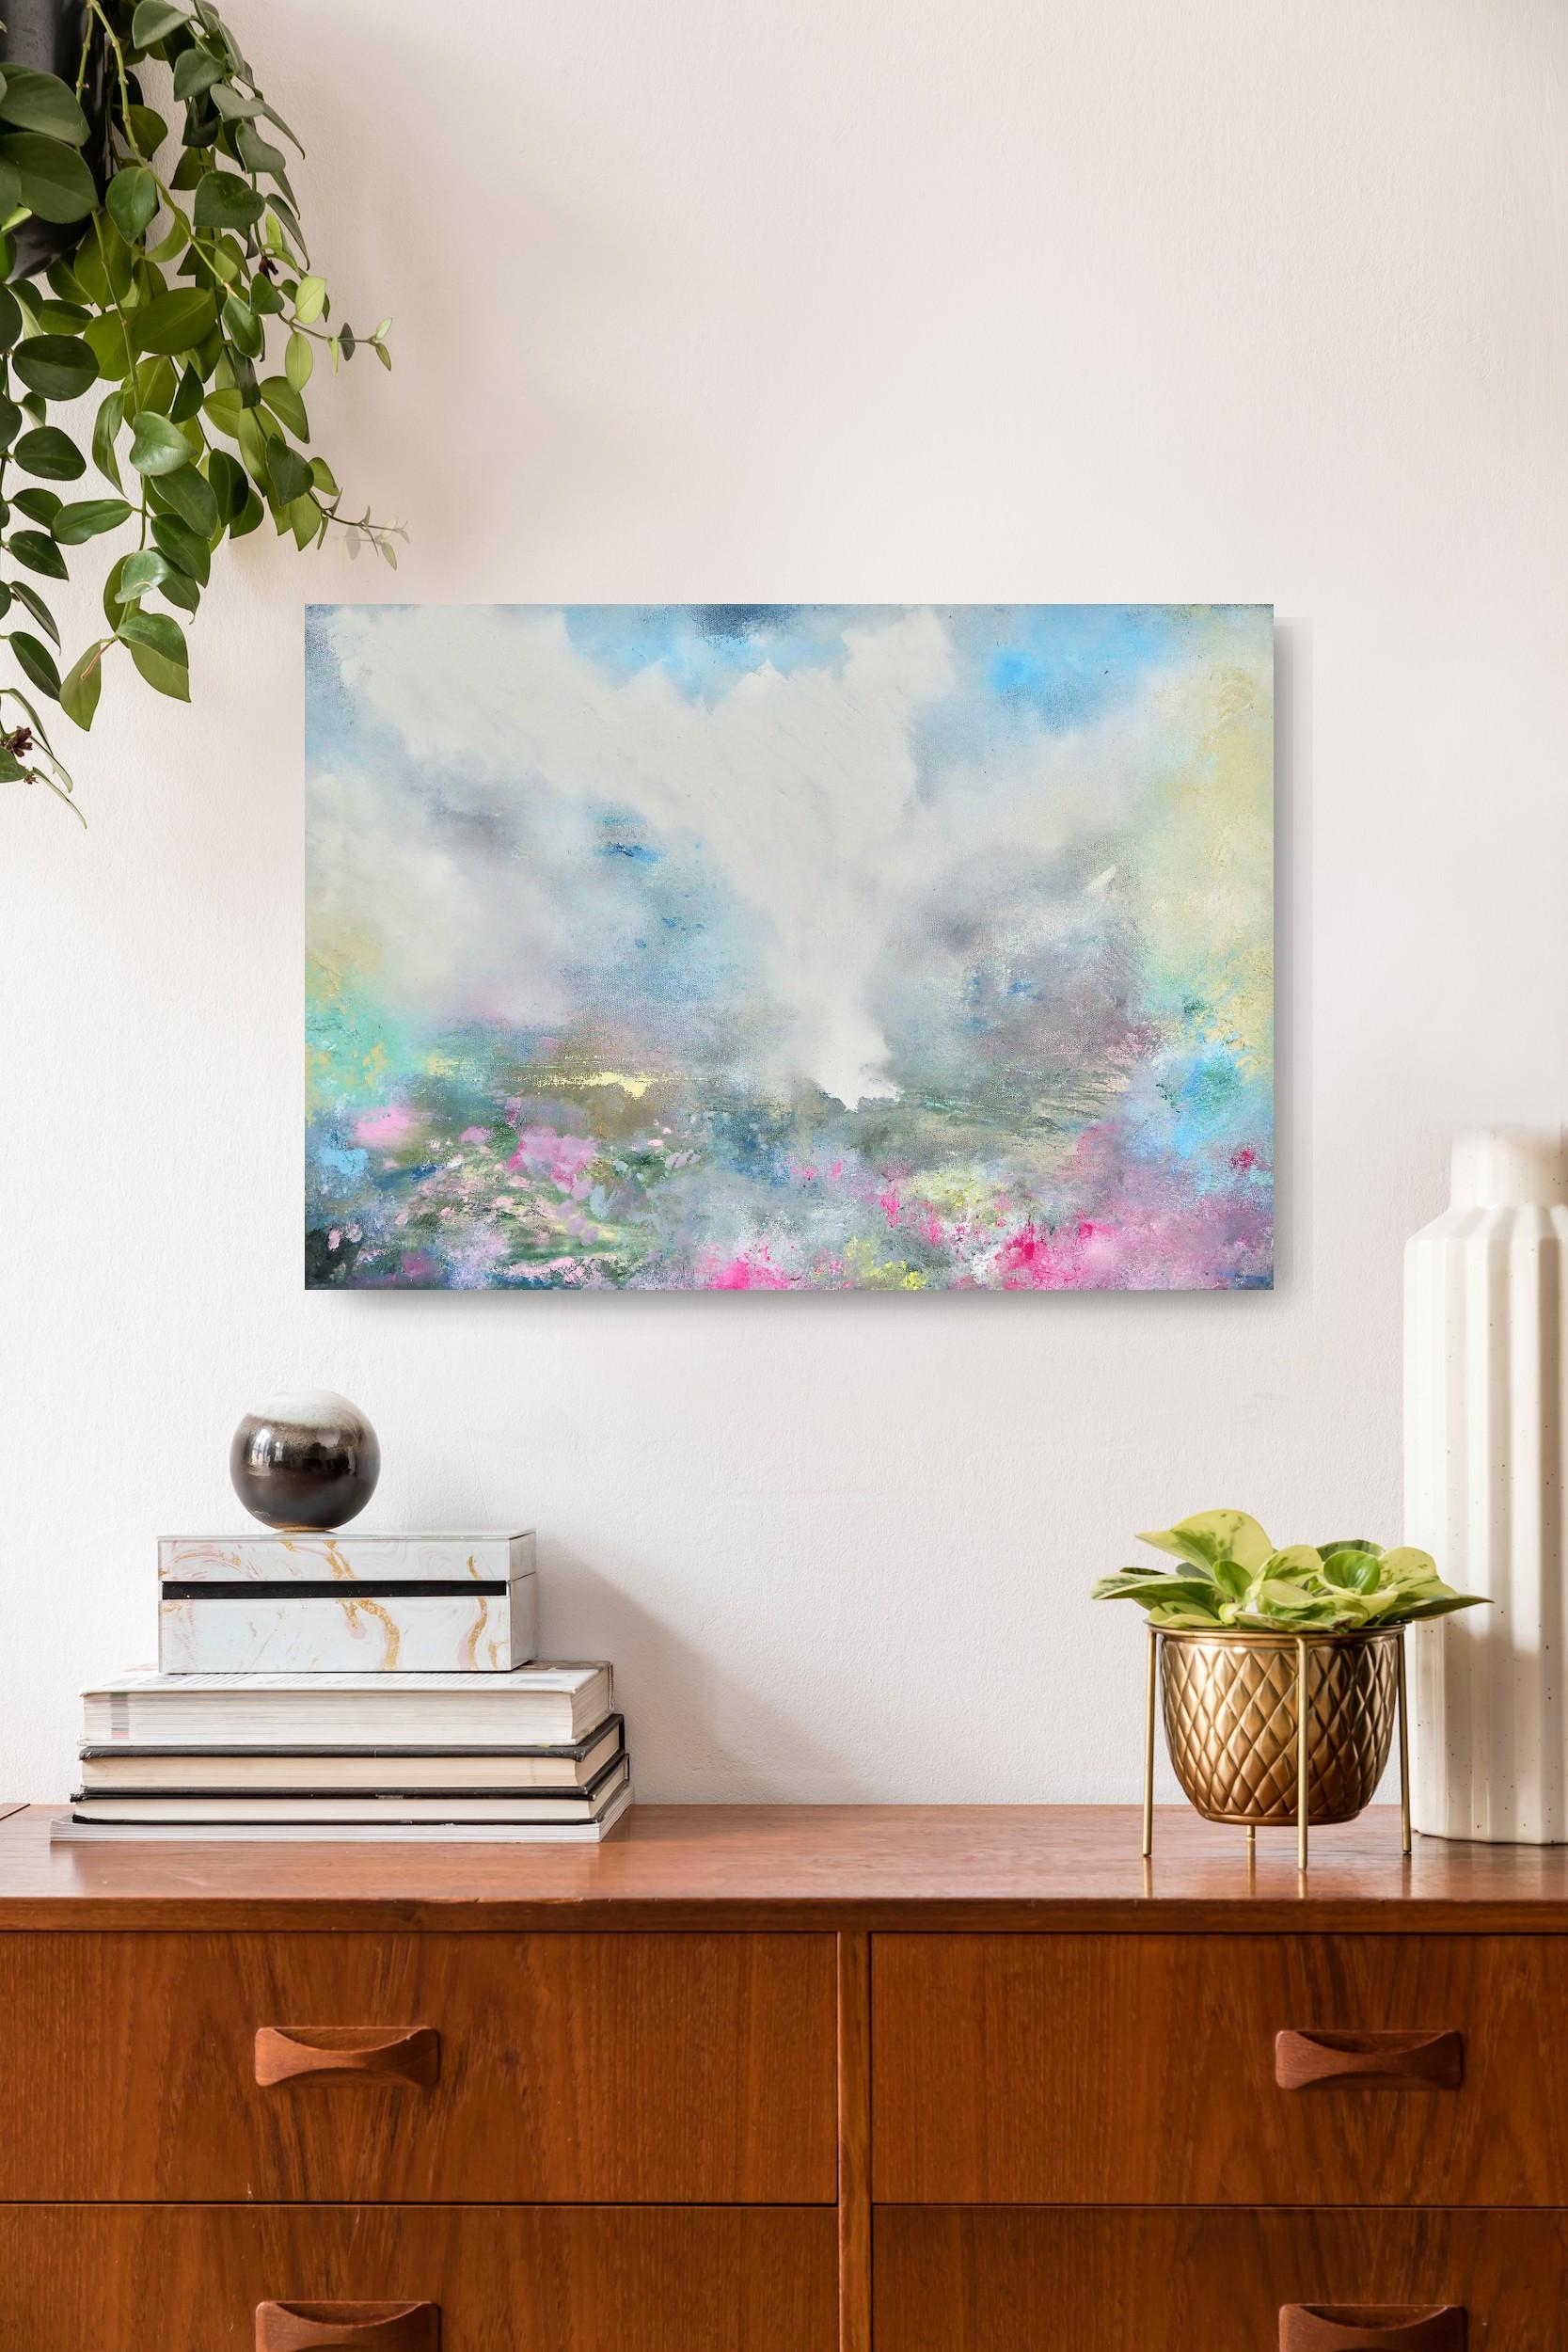 Blossom Fields by Laura Weekes [2022]

original
Oil Paint and Acrylic Paint on Canvas
Image size: H:42 cm x W:59 cm
Complete Size of Unframed Work: H:42 cm x W:59 cm x D:1.5cm
Sold Unframed
Please note that insitu images are purely an indication of